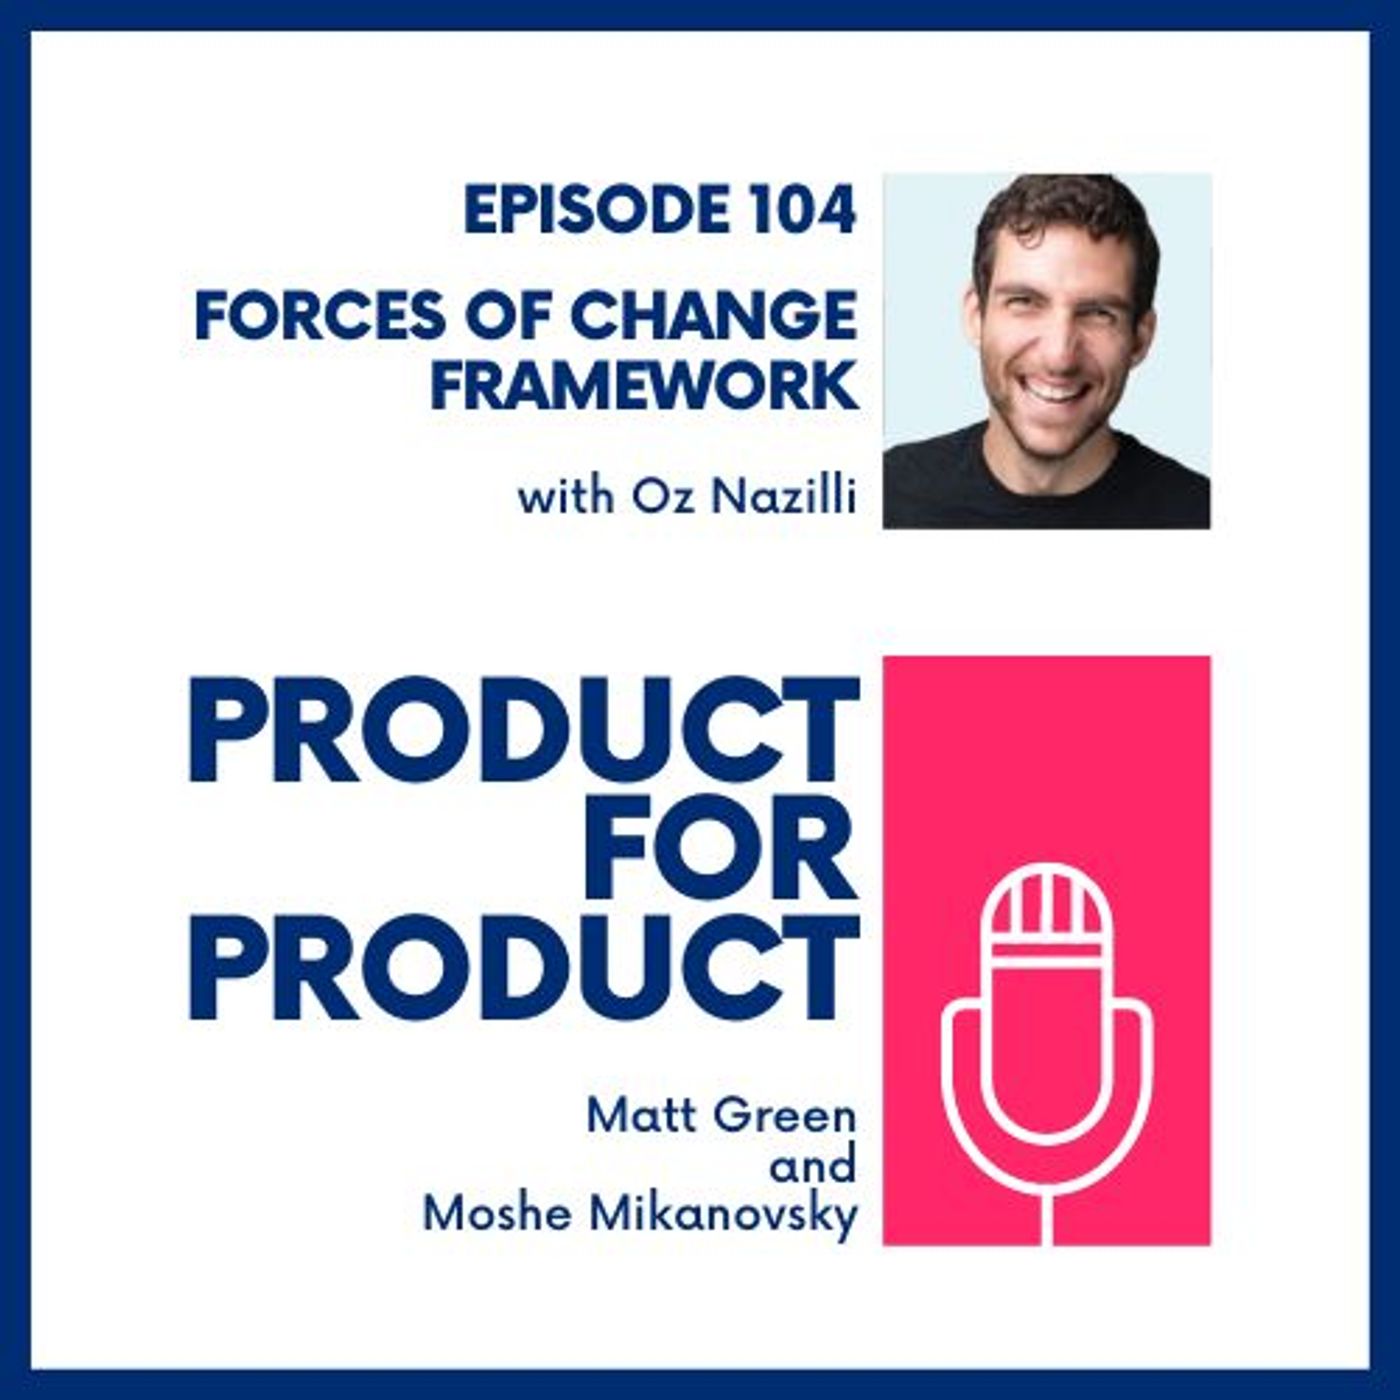 EP 104 - Forces of Change with Oz Nazilli